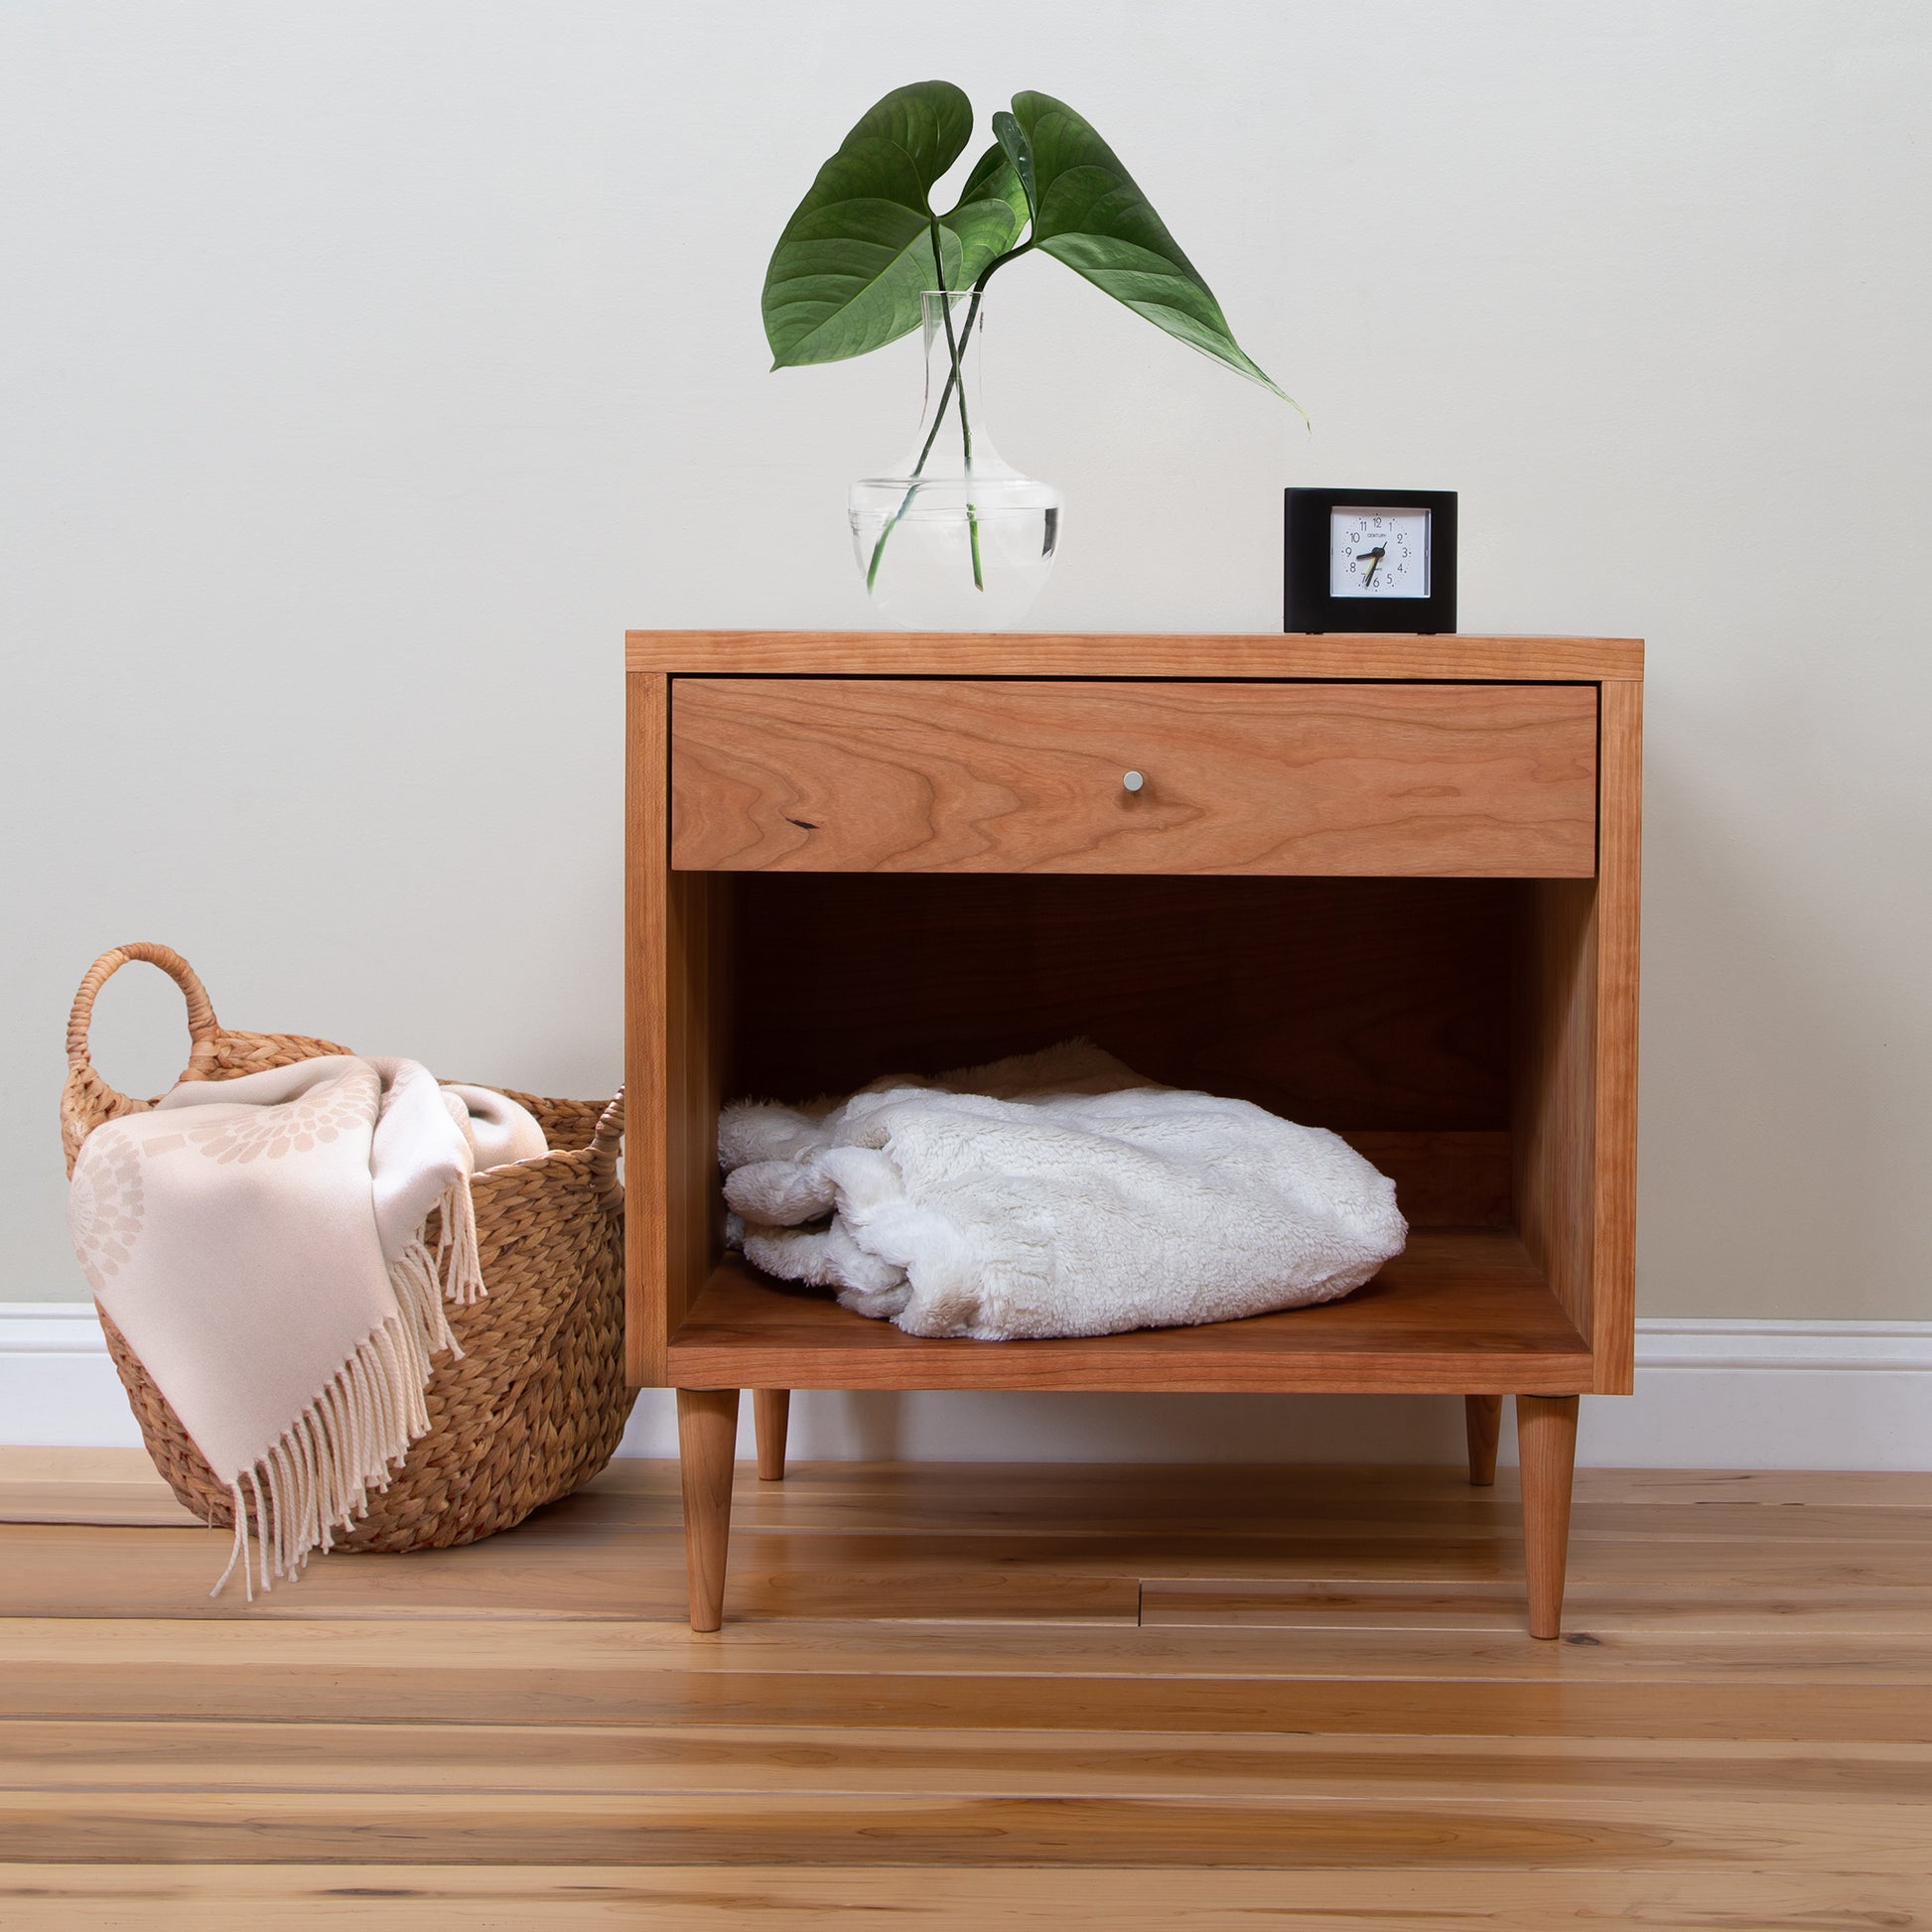 A Vermont Furniture Designs Larssen 1-Drawer Wide Nightstand made of natural cherry wood, featuring a basket and a plant.